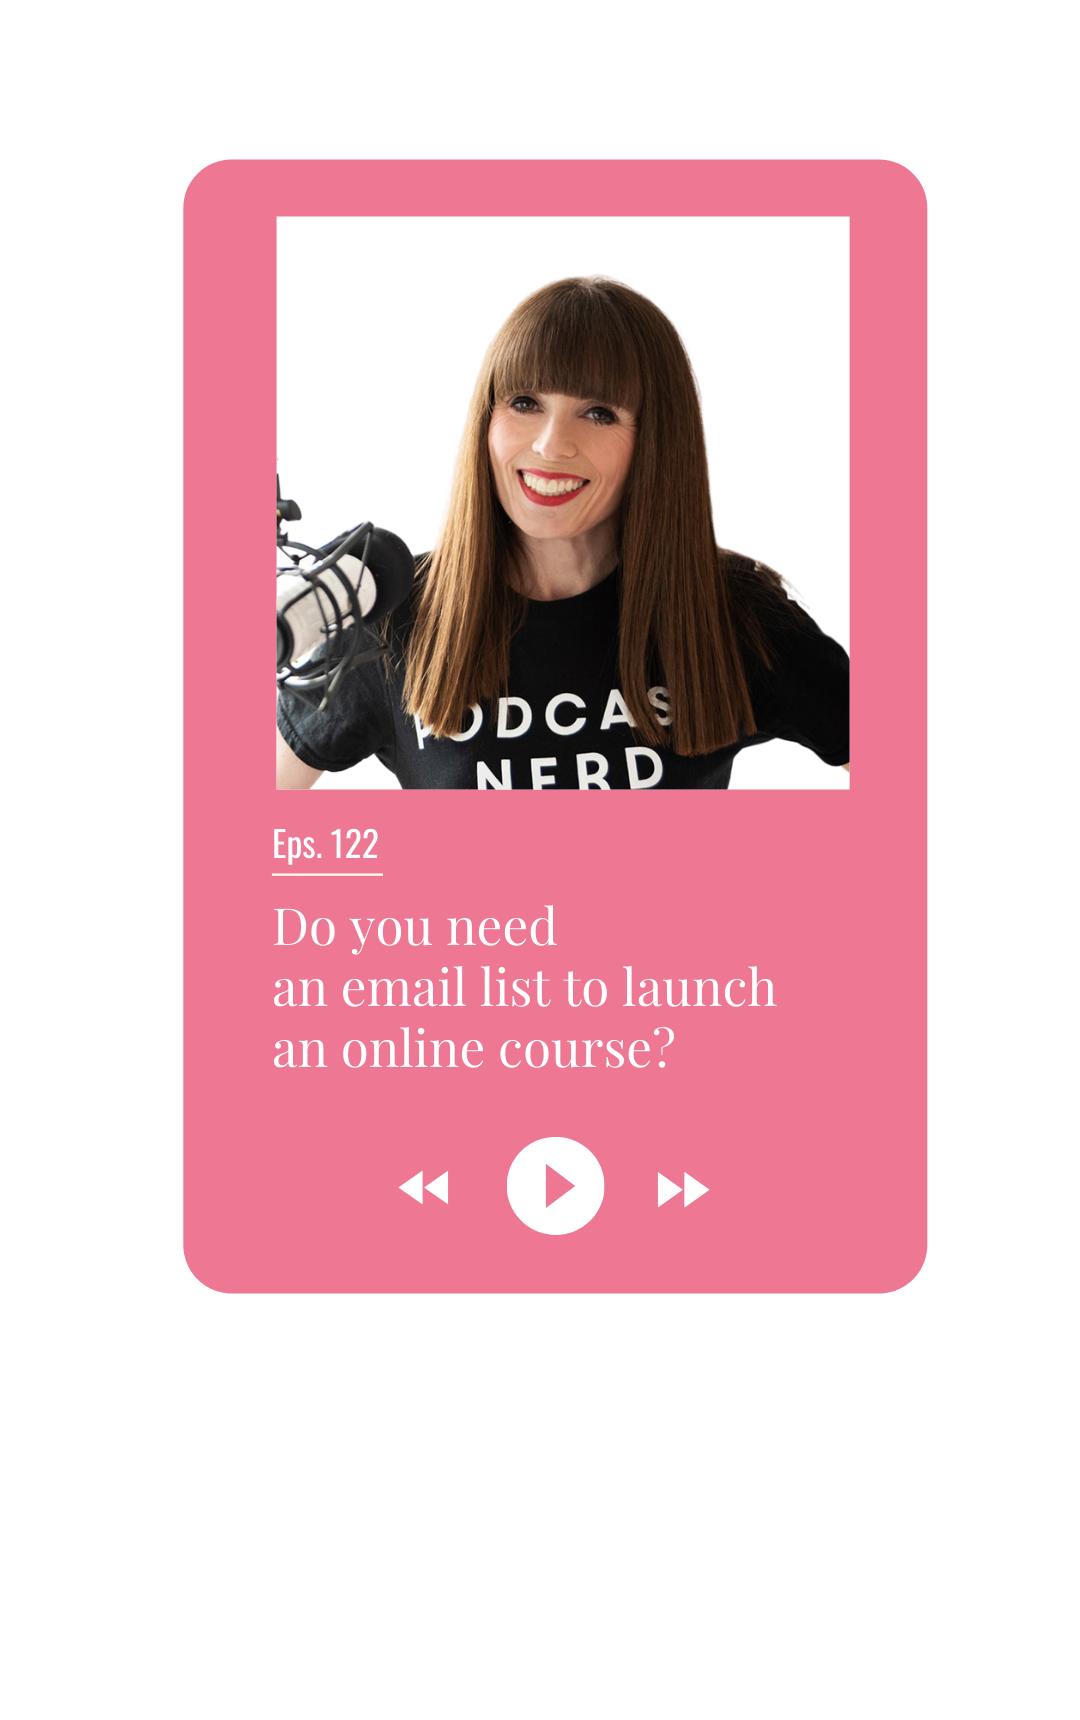 Do you need an email list to launch an online course?